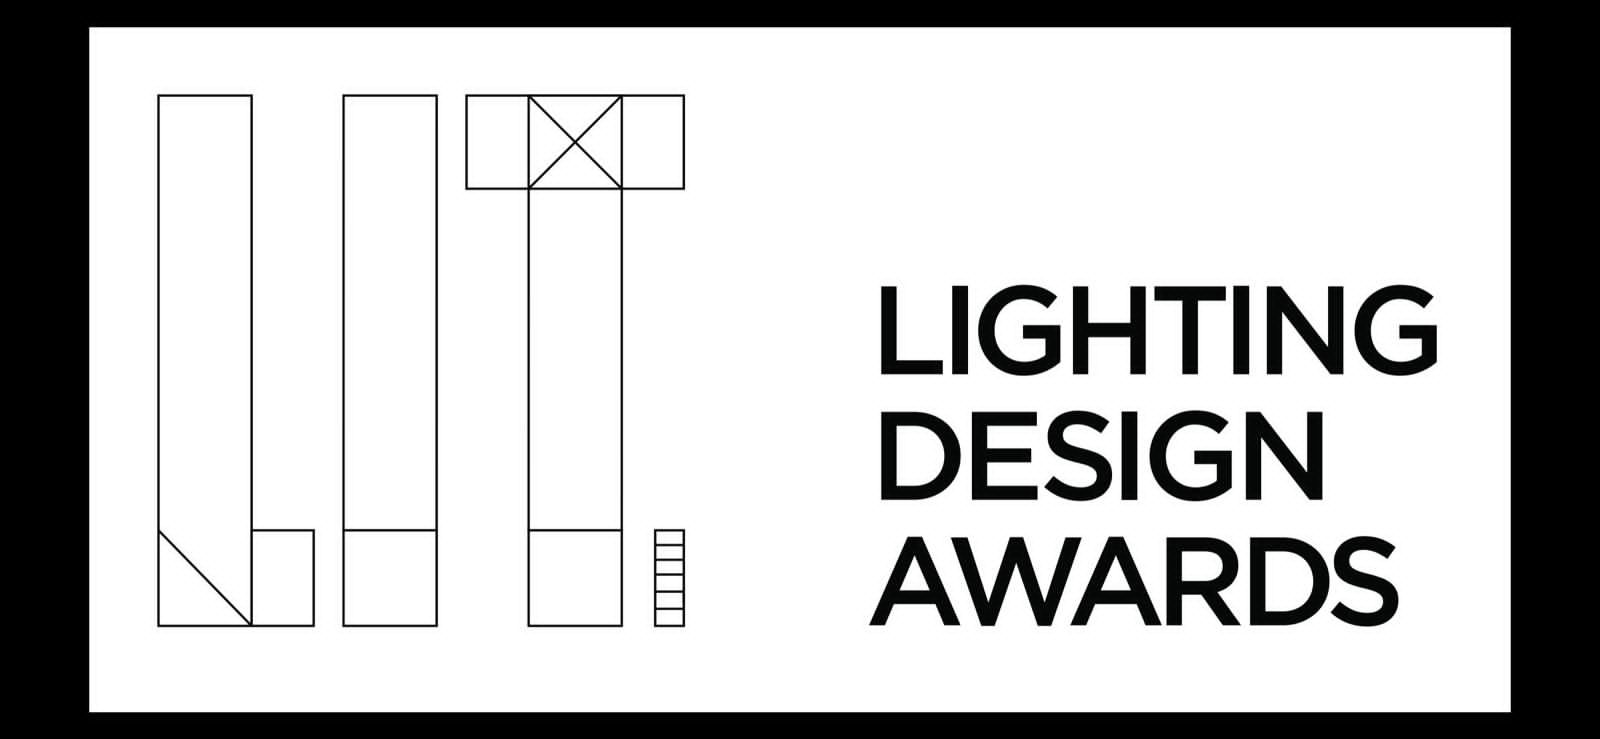 LIT Lighting Design Awards announces the 2020 Winners and Special Prizes